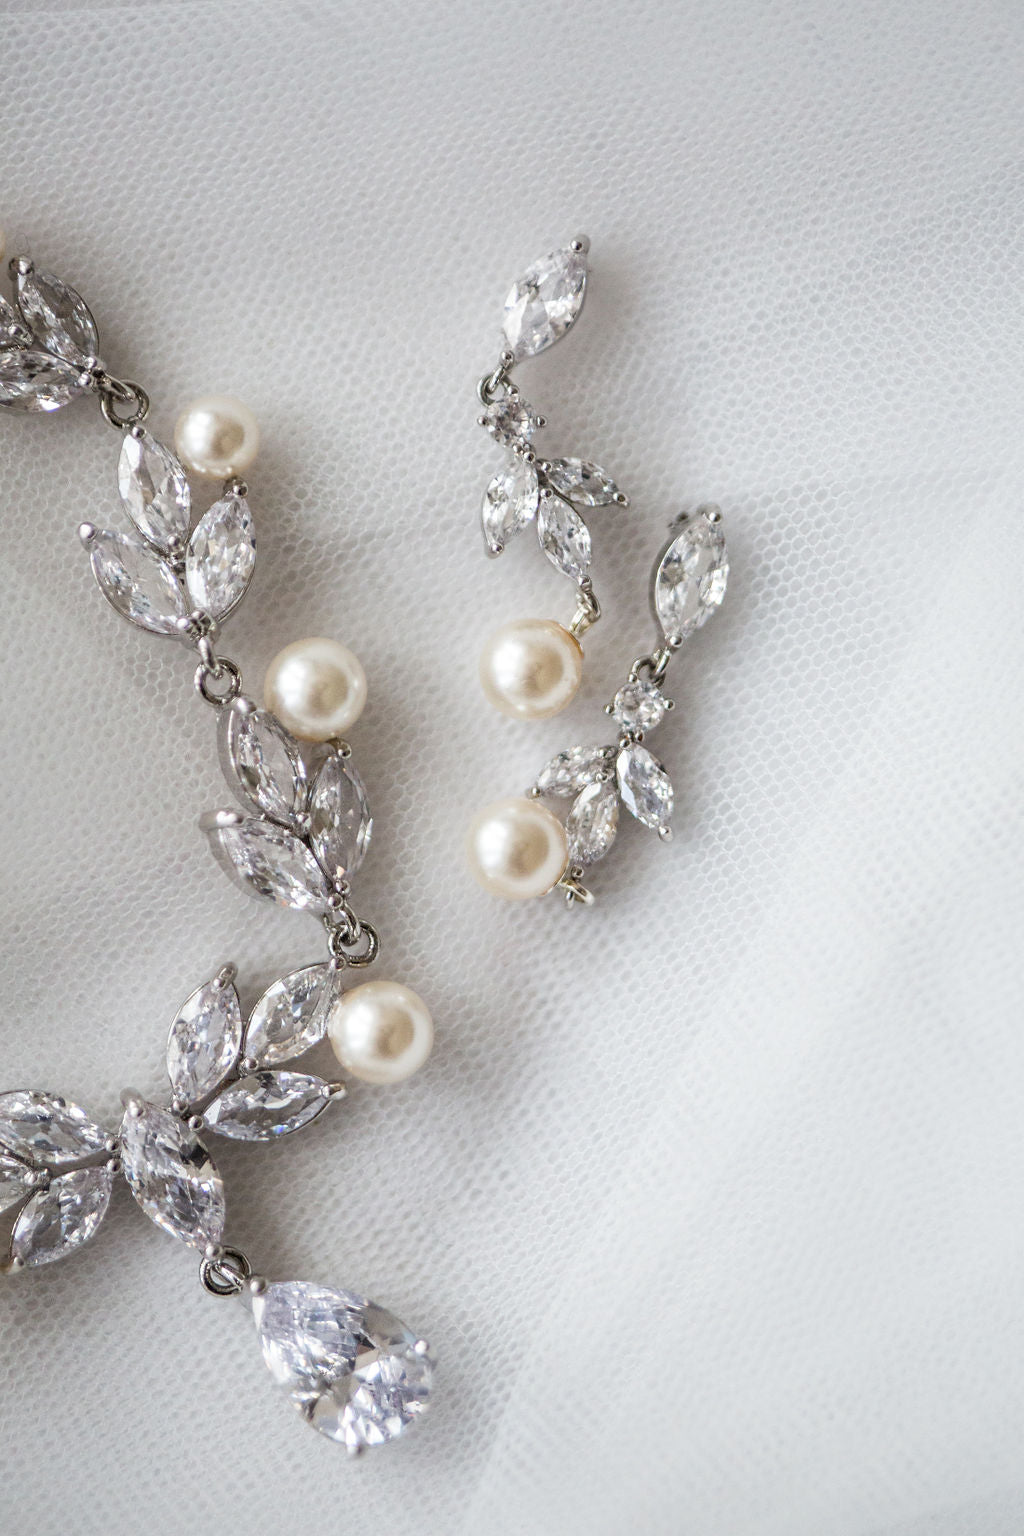 Statement Pearl Necklace Jewellery Set